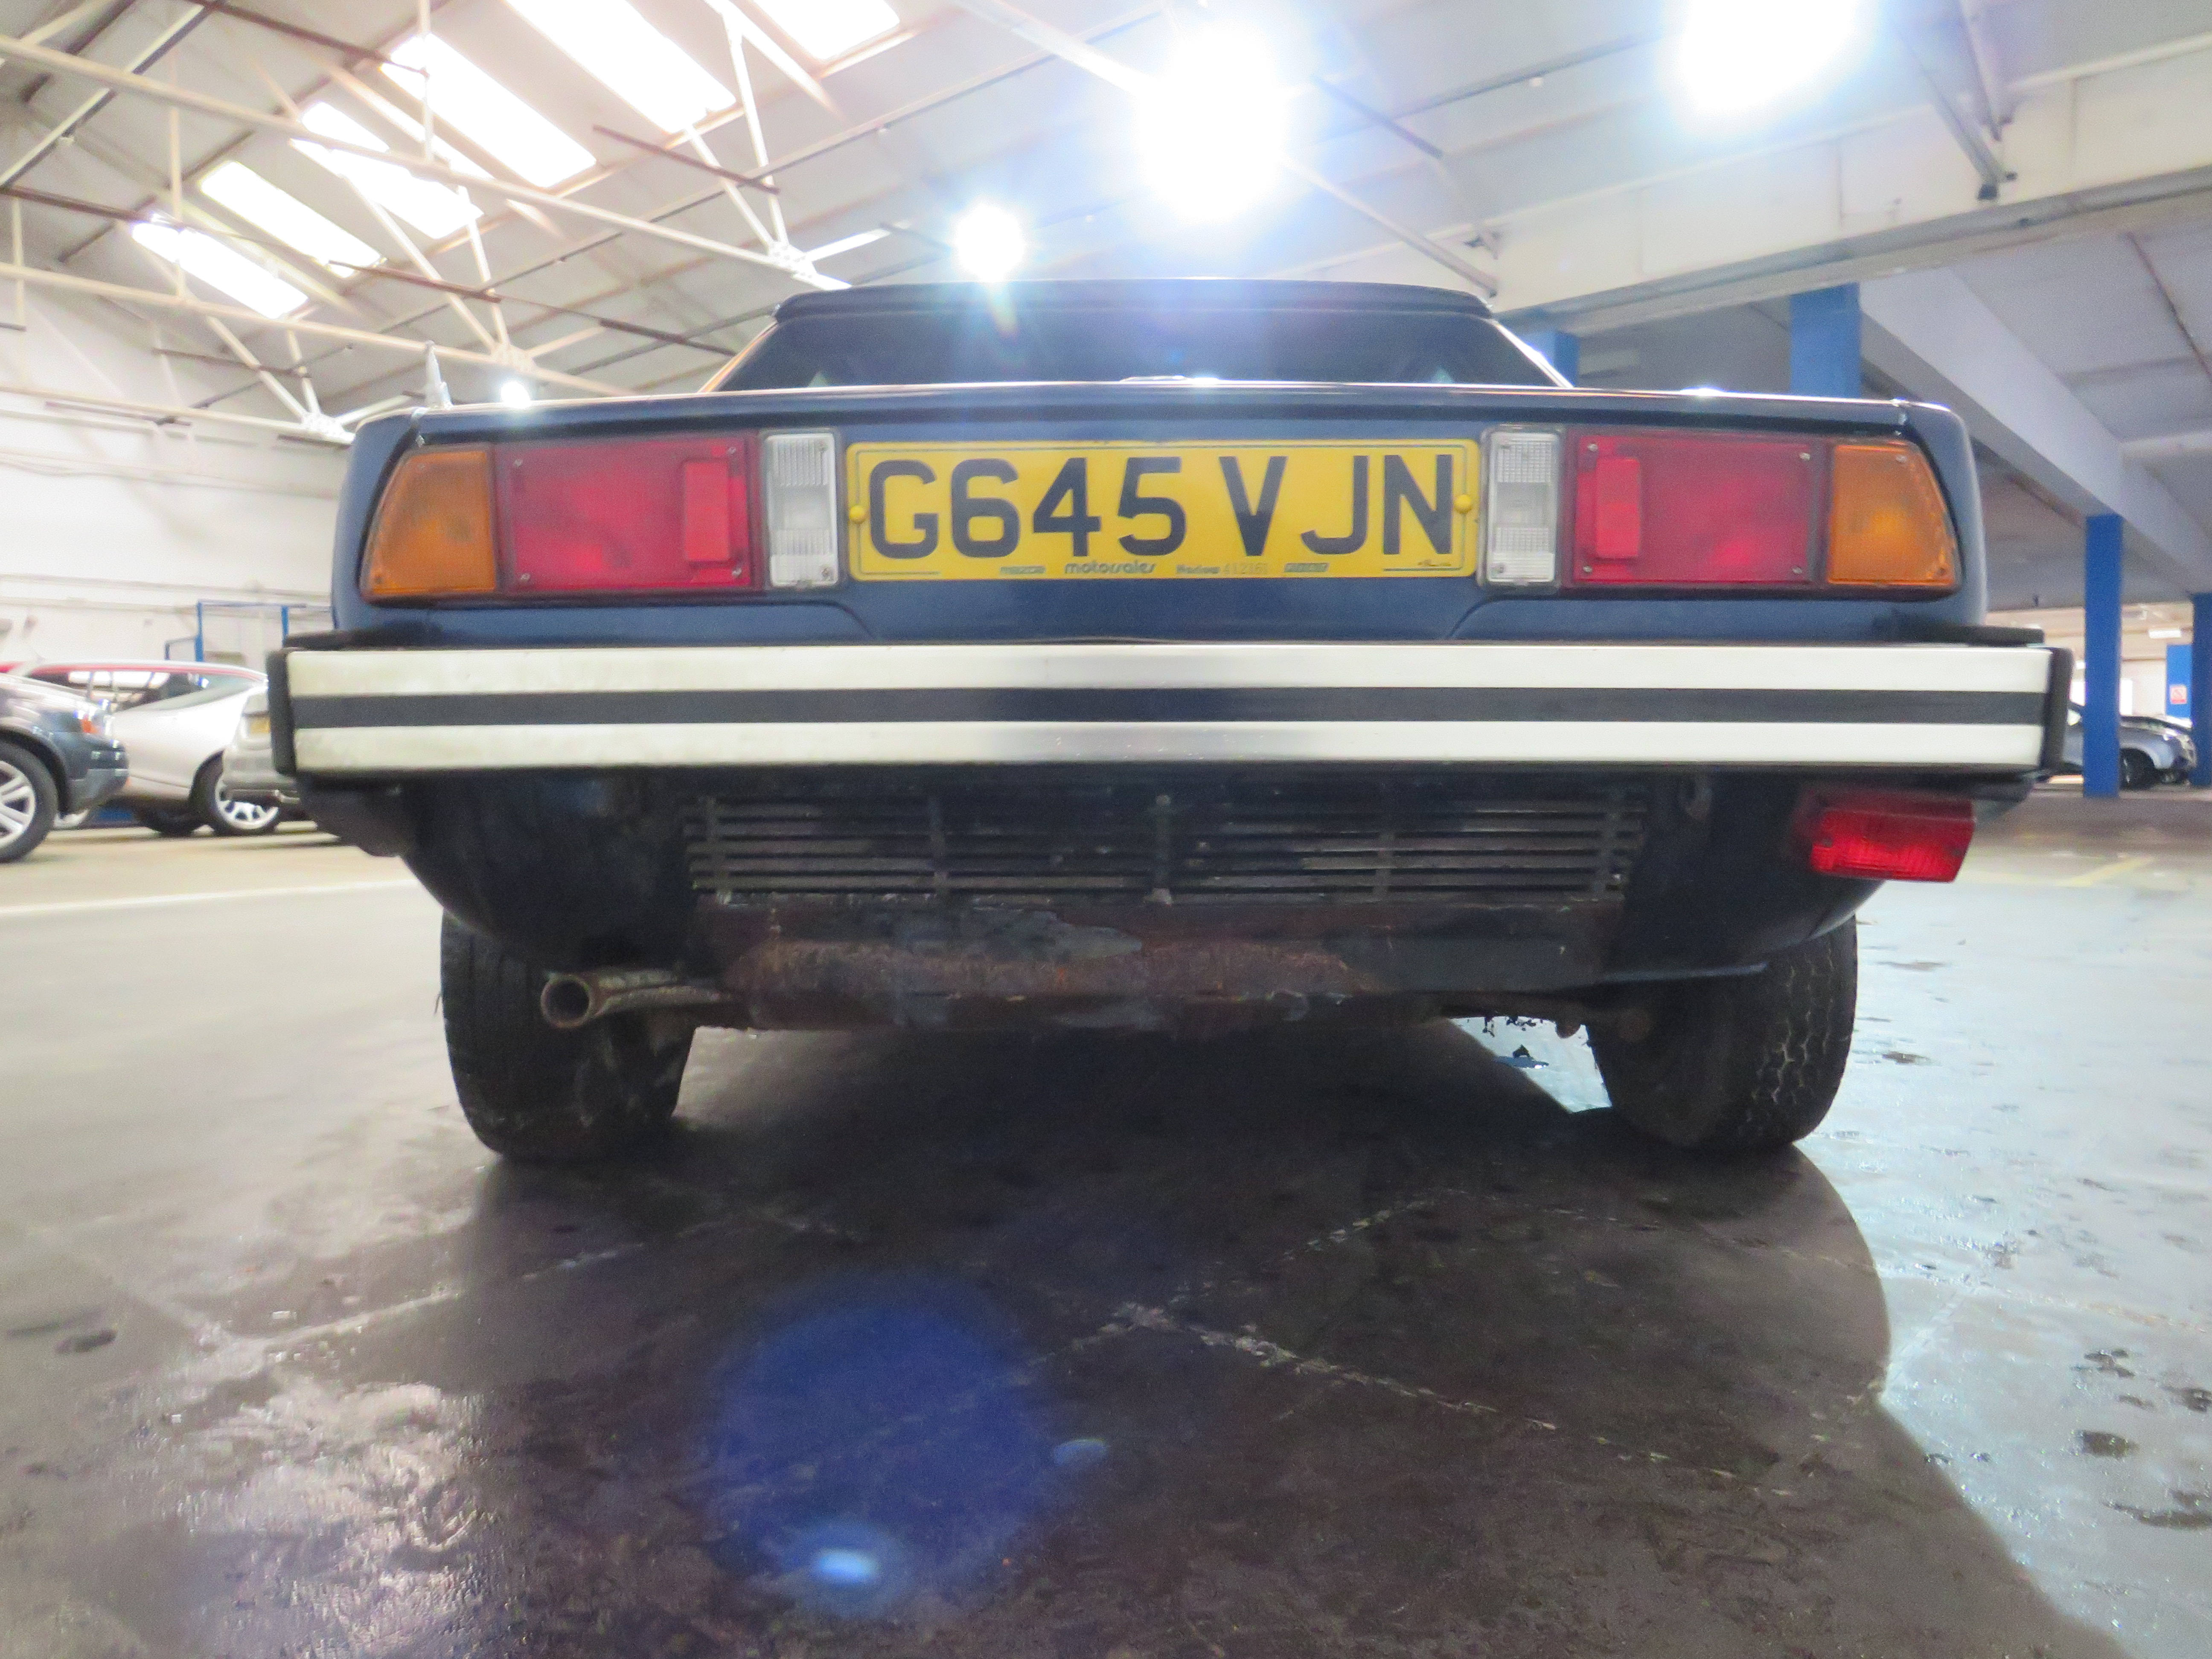 1989 Fiat X1/9 Gran Finale - 1498cc - ONE OWNER FROM NEW - Image 33 of 38